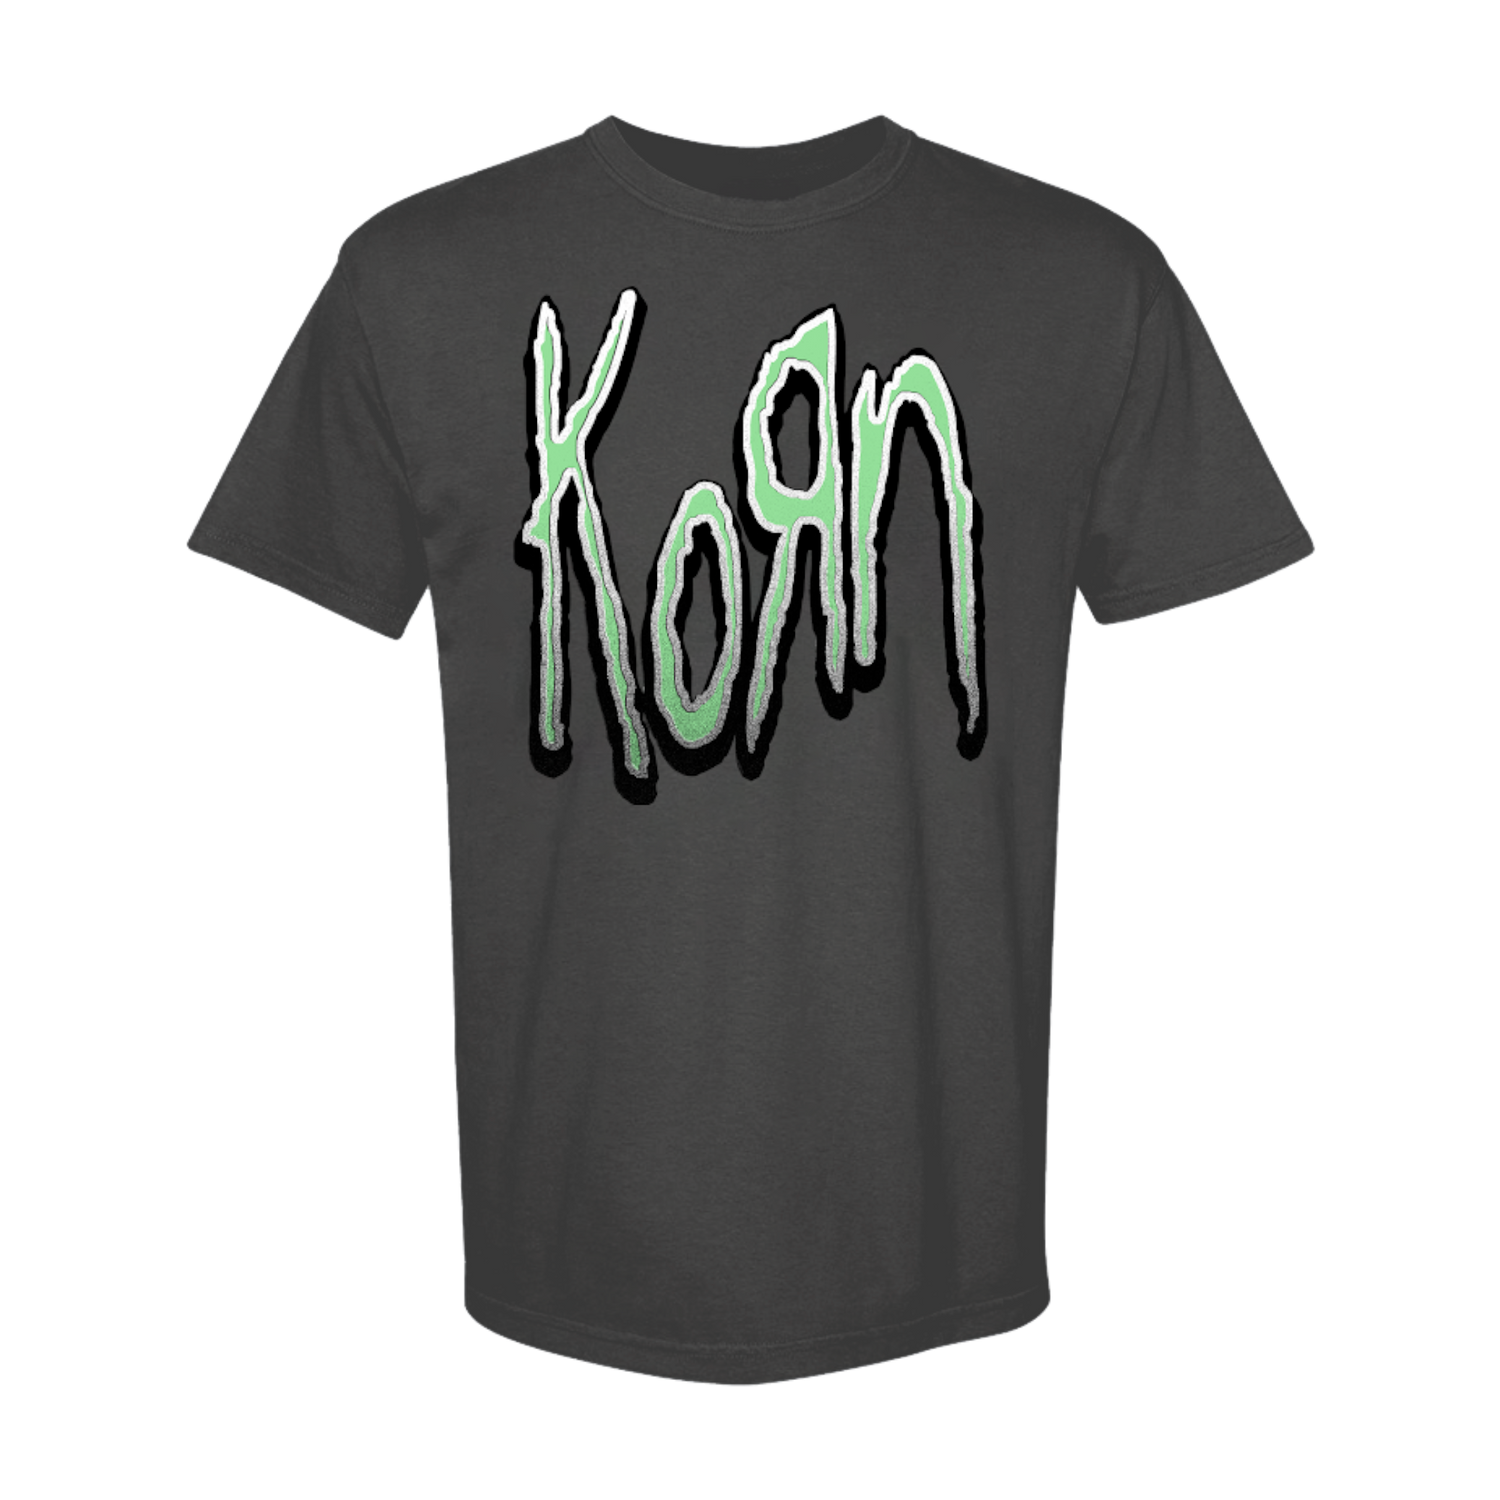 Vintage black unisex t-shirt with a neon green Korn logo printed on the front